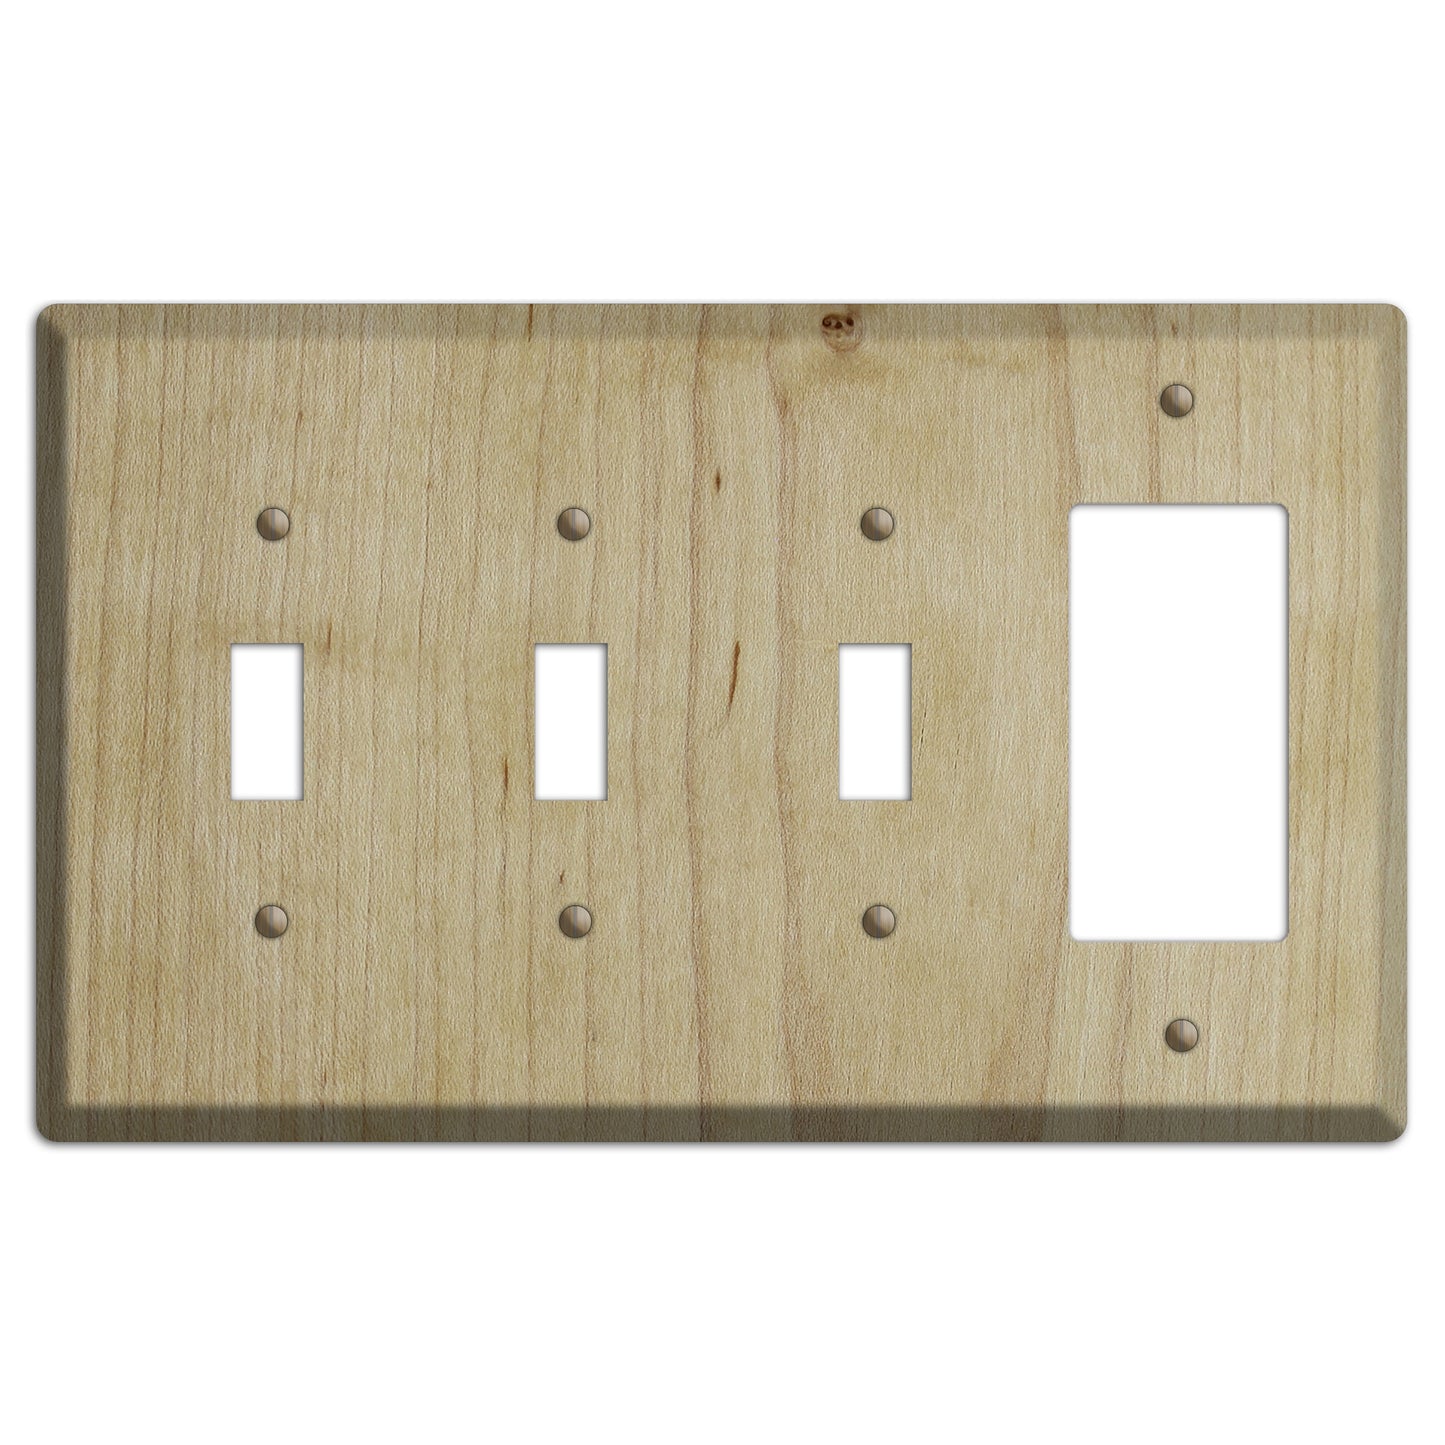 Unfinished Maple Wood 3 Toggle / Rocker Outlet Cover Plate